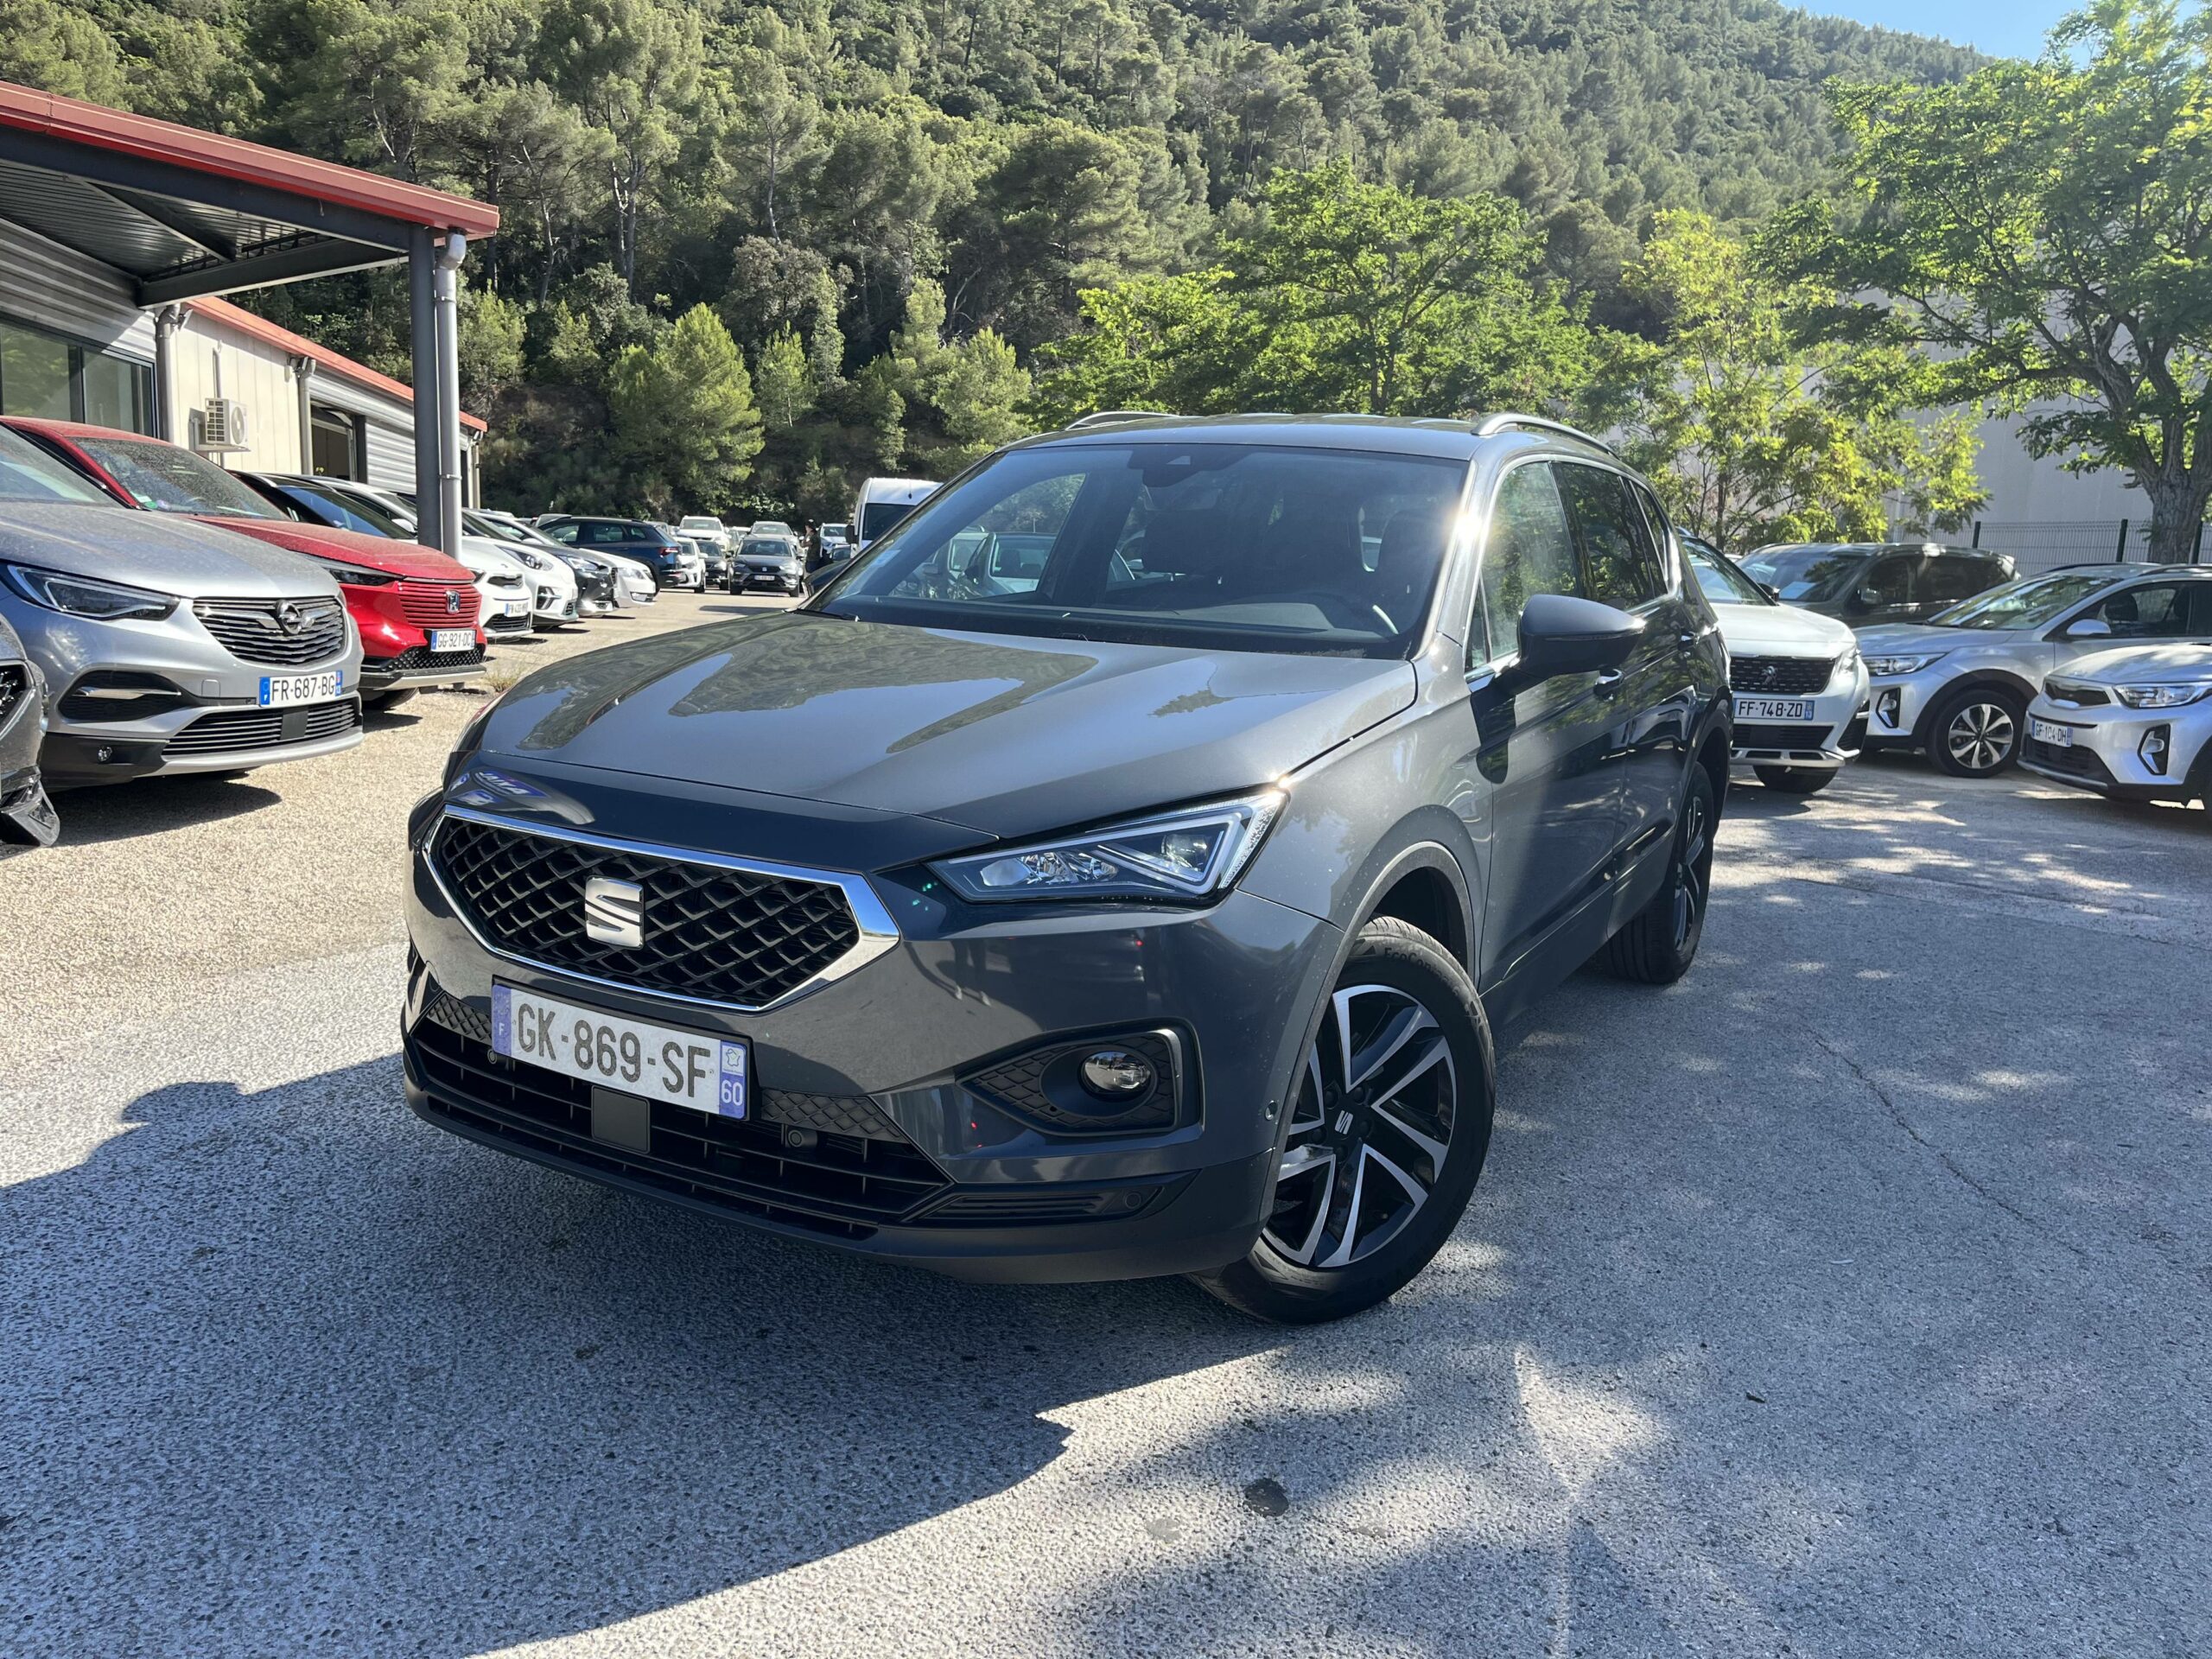 SEAT Tarraco 2.0 TDI 150 ch Start/Stop DSG7 7 pl – Finition FR – Occasion –  2952139890 – Roure Automobiles